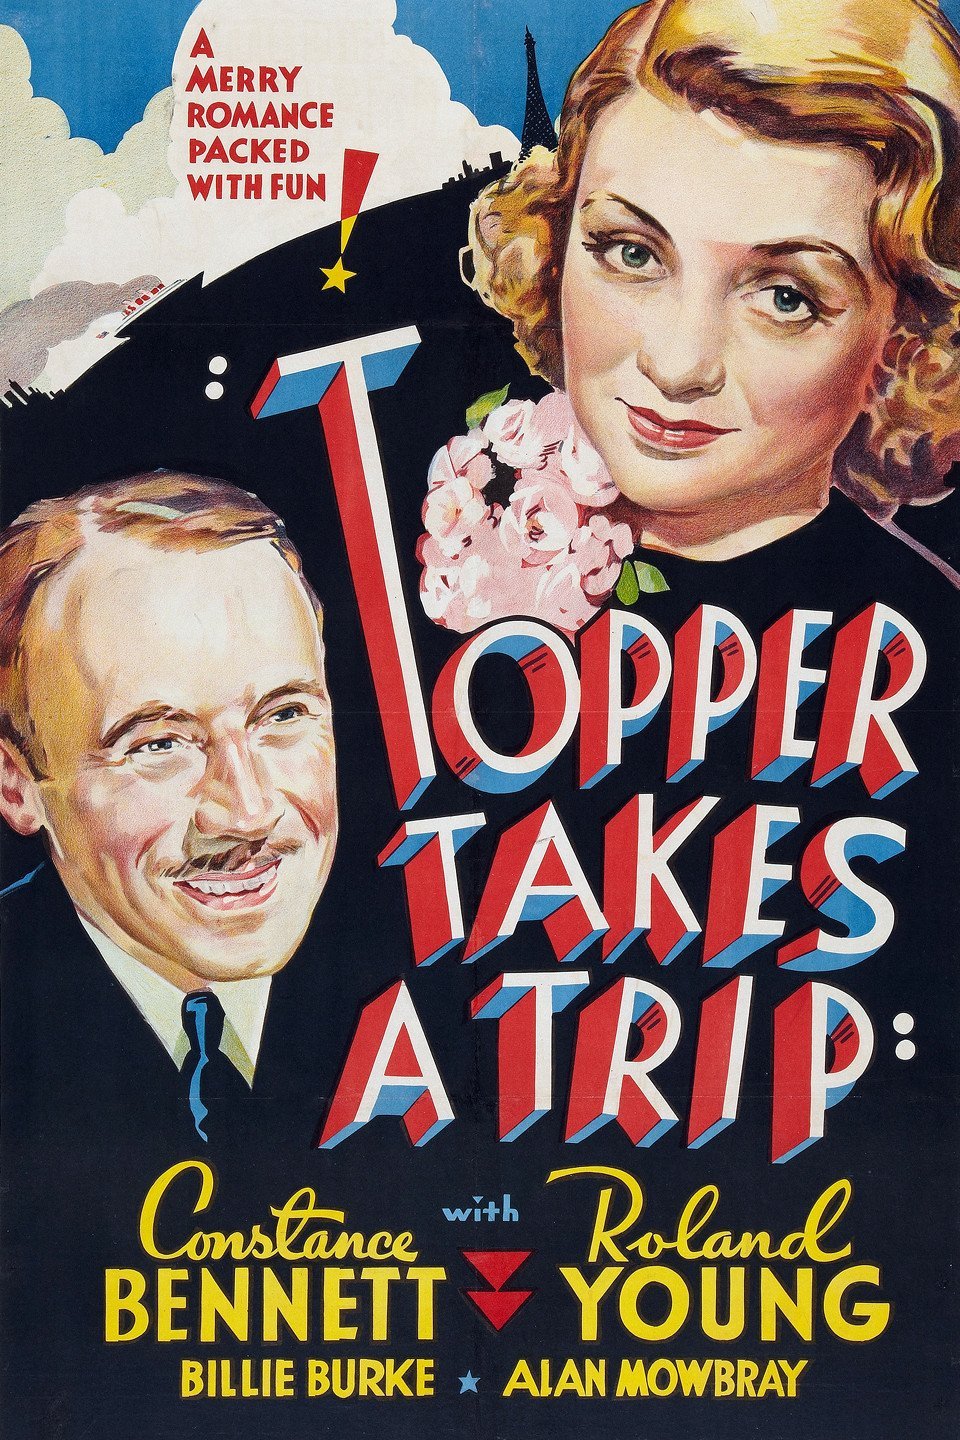 Poster of the movie Topper Takes a Trip